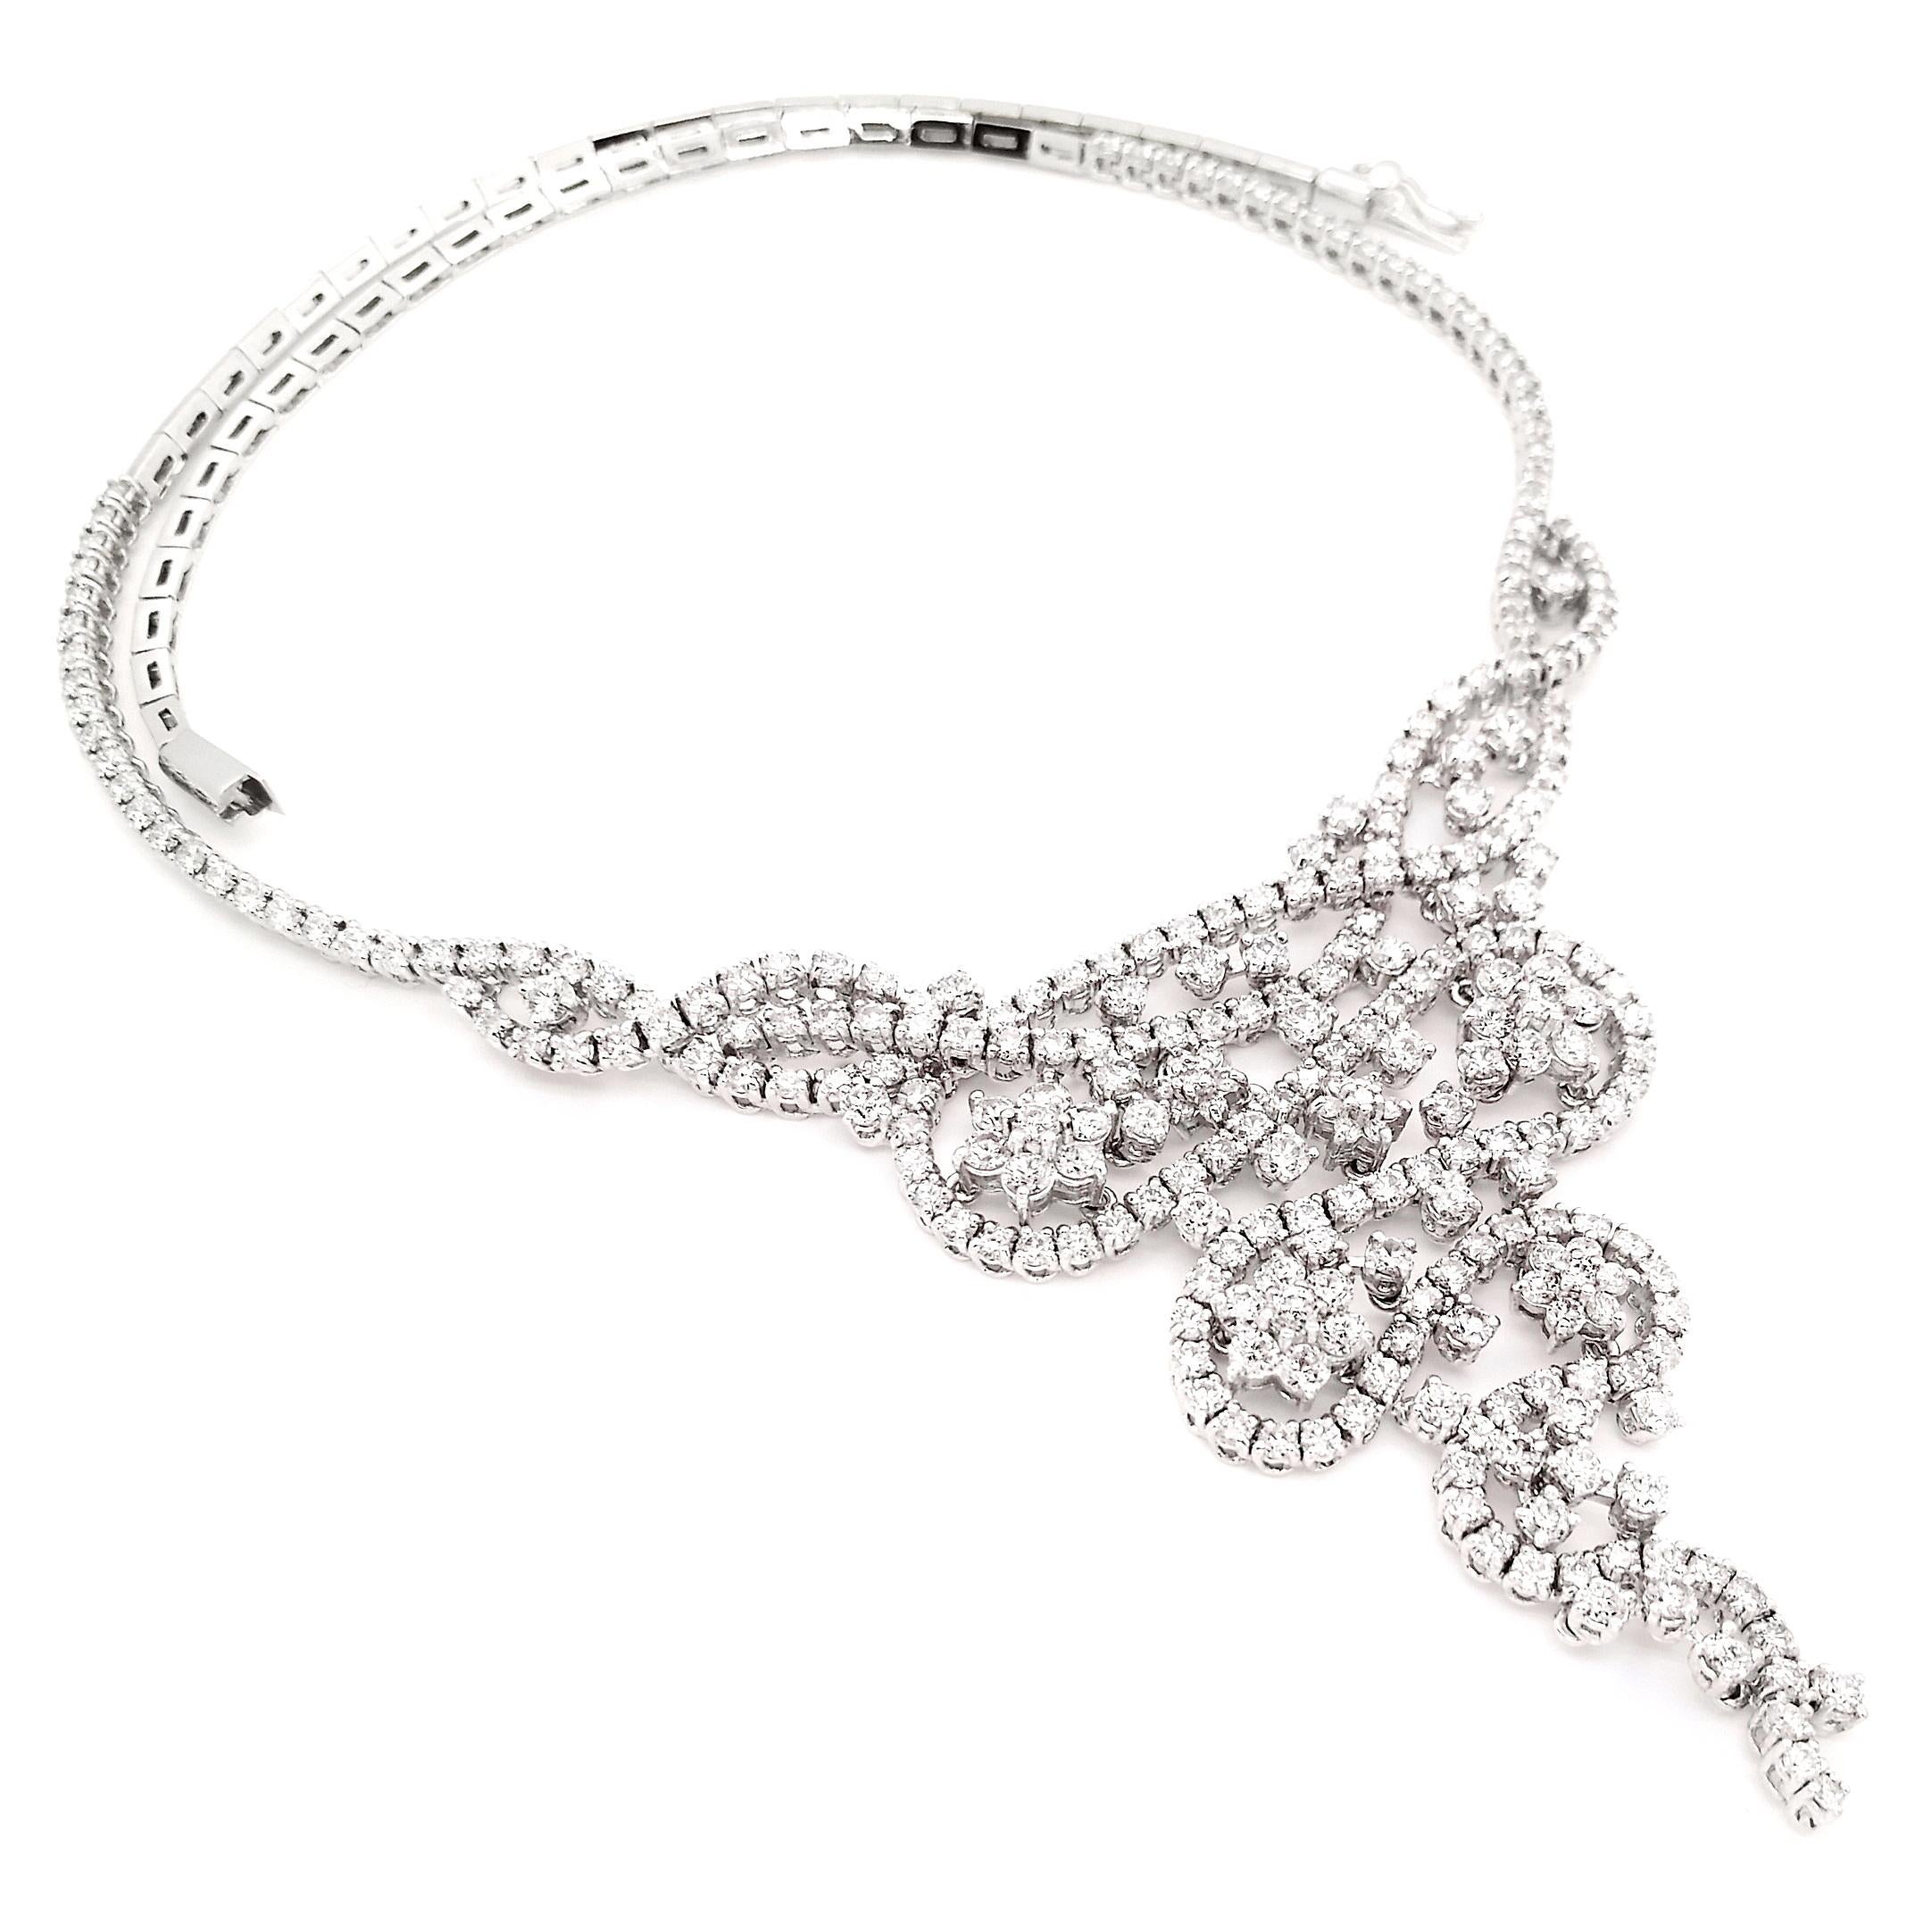 Step into the extraordinary with this exquisite 18K white gold necklace adorned with a stunning array of 285 round brilliant natural diamonds. Its opulent unique design is a true spectacle, majesty and elegance that leaves an unforgettable